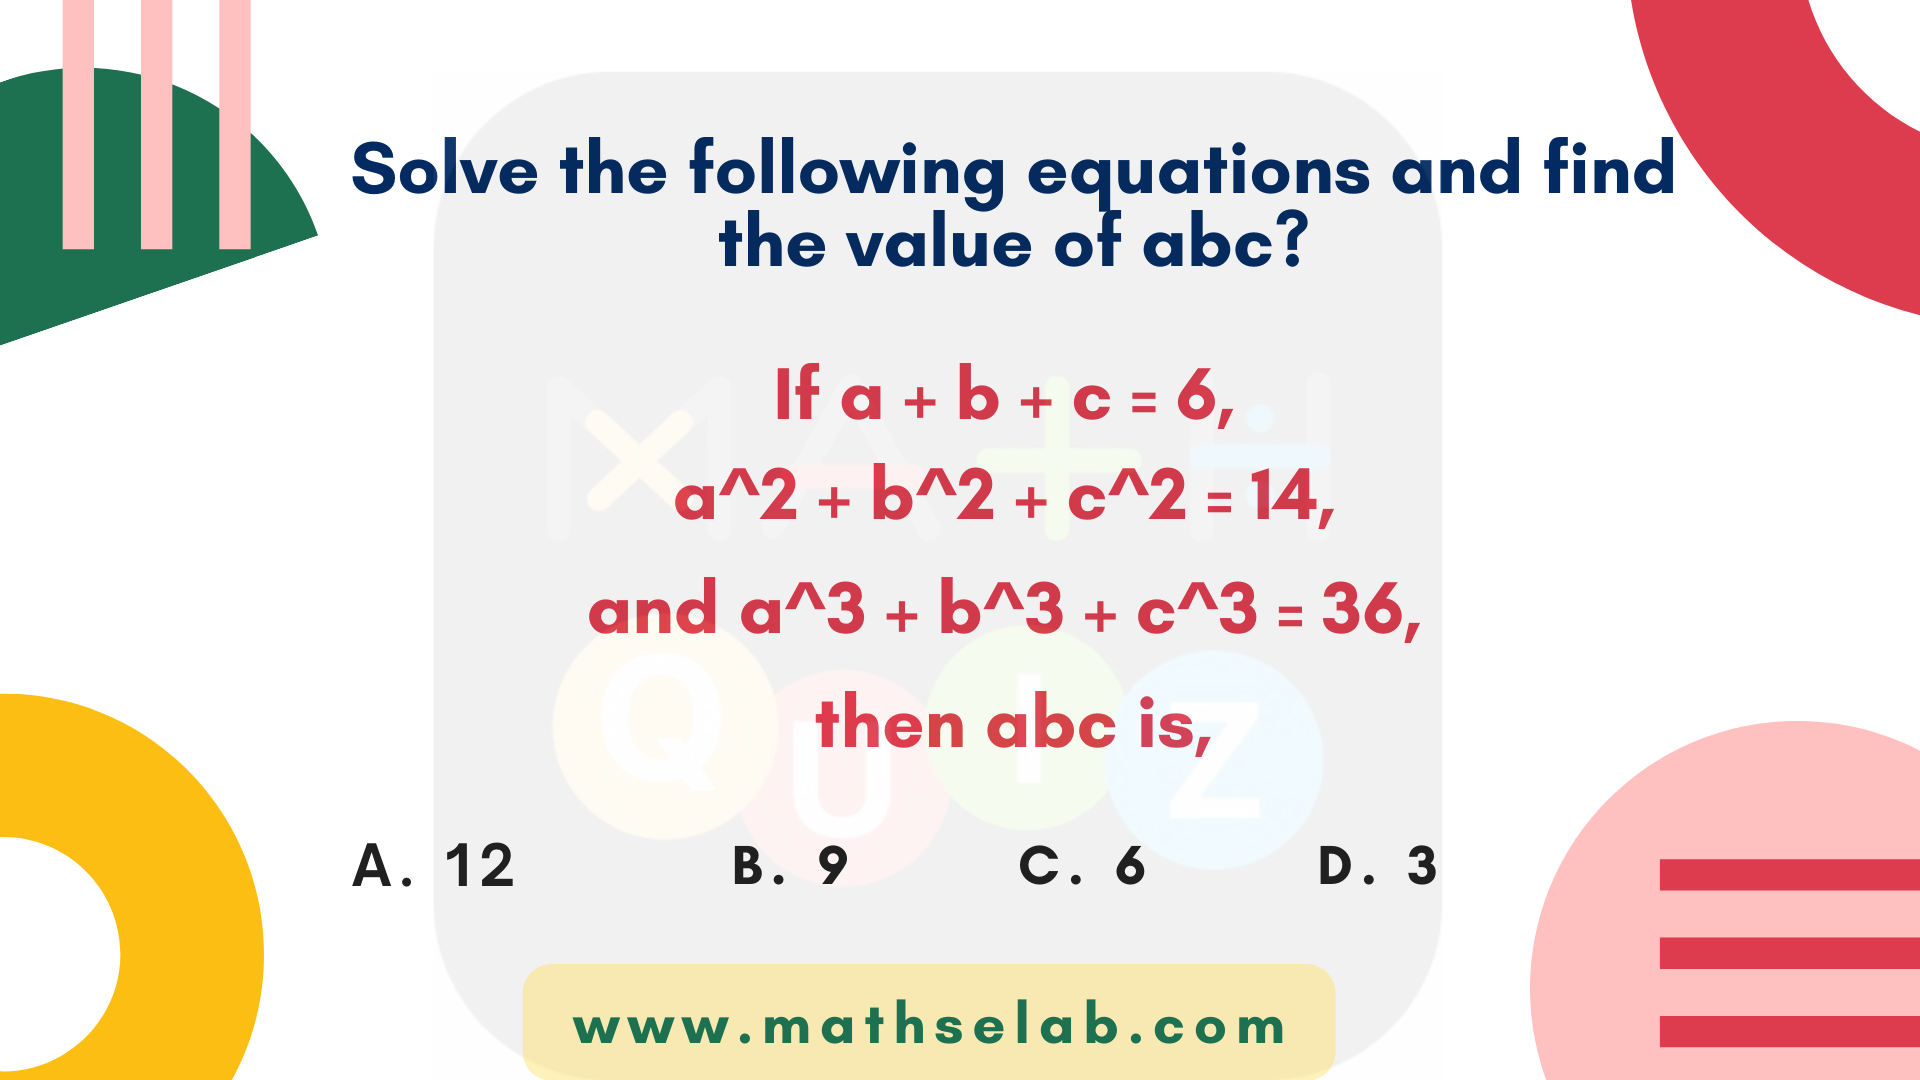 Solve the following equations and find the value of abc?   If a + b + c = 6, a^2 + b^2 + c^2 = 14, and  a^3 + b^3 + c^3 = 36, then abc is,